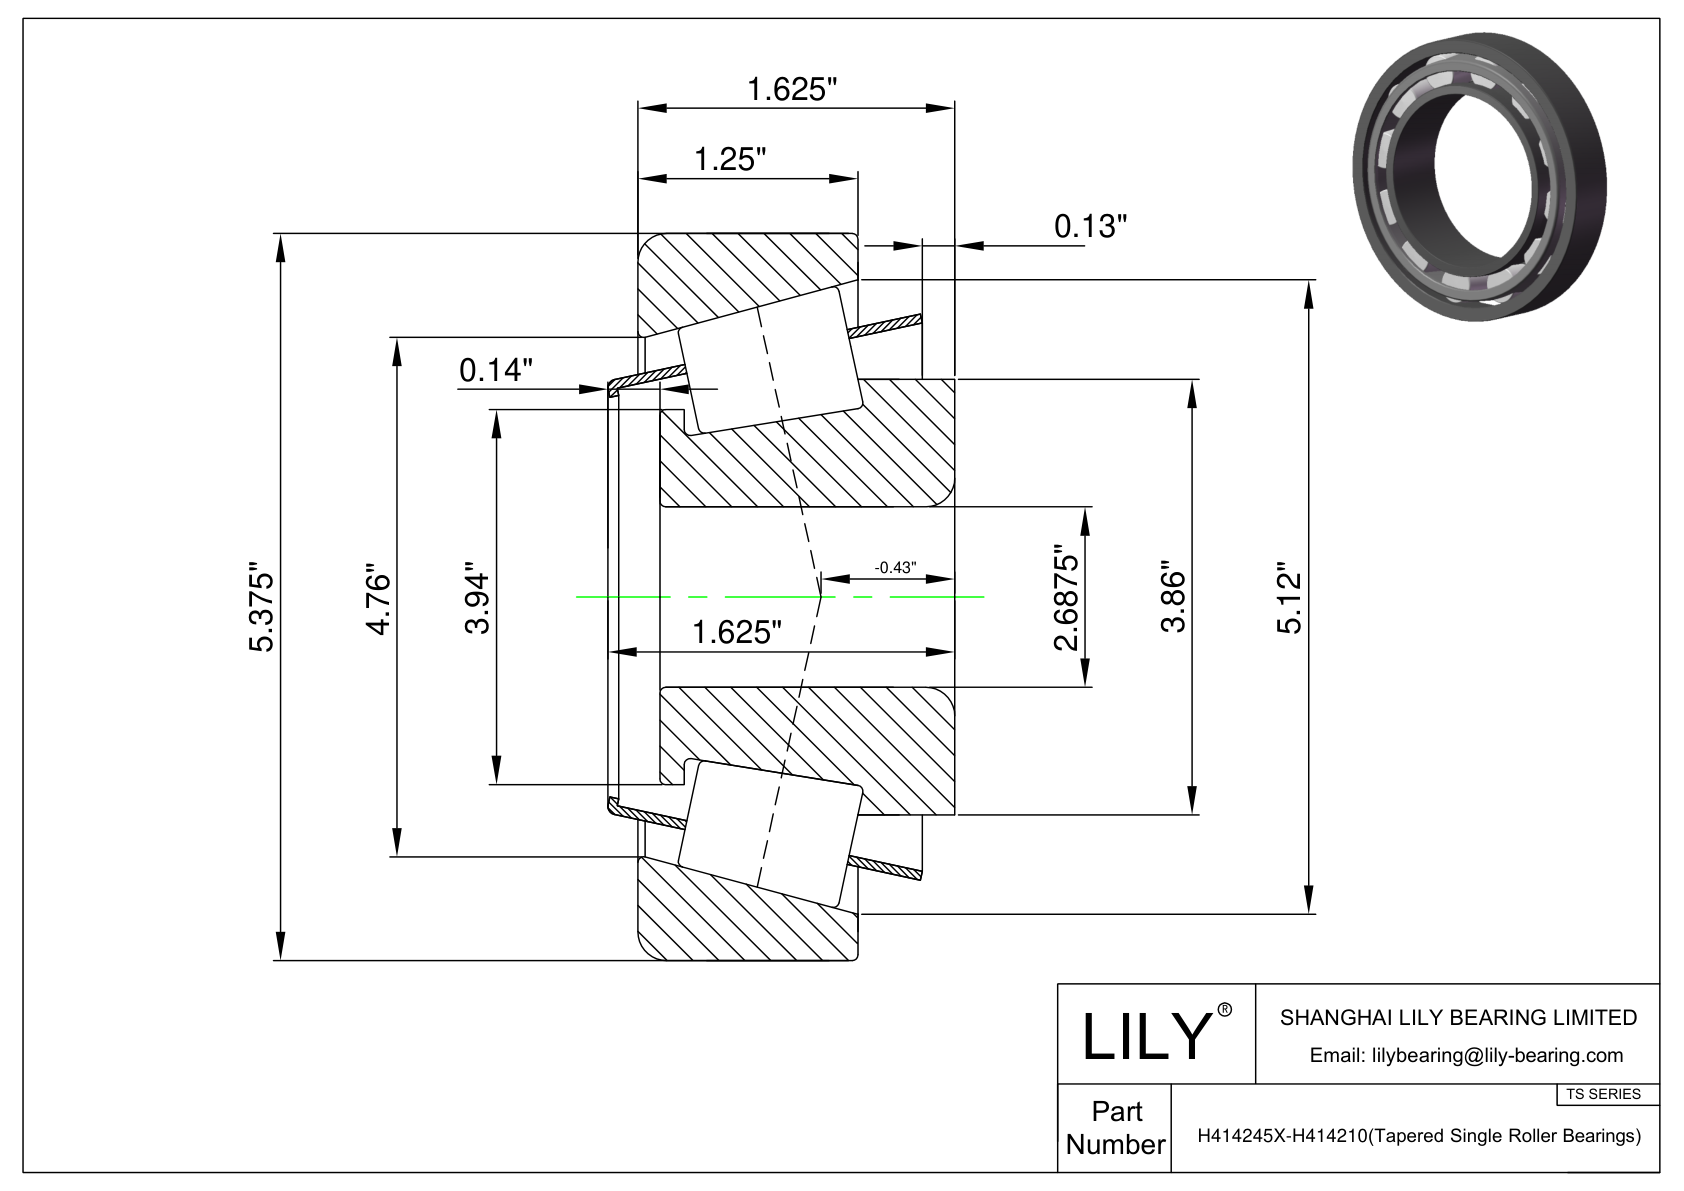 H414245X-H414210 TS (Tapered Single Roller Bearings) (Imperial) cad drawing